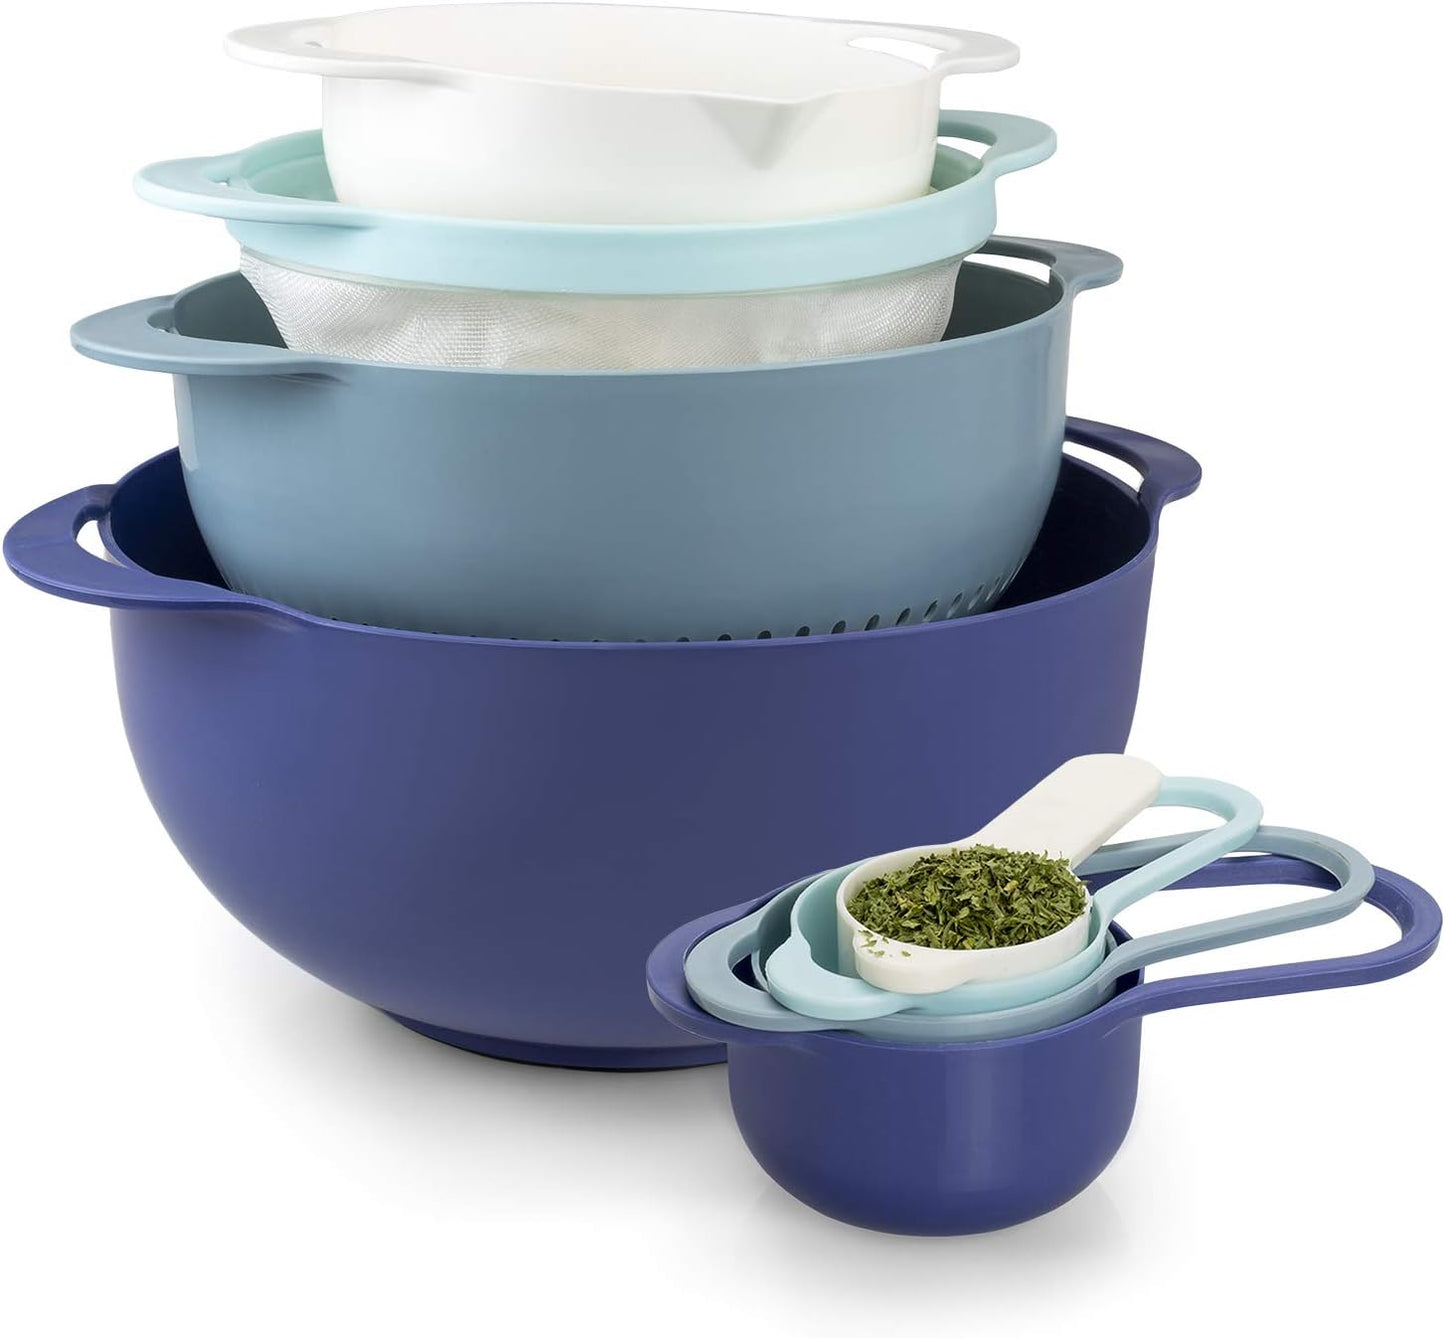 COLORFUL 8 Piece Nesting Bowls, Measuring Cups Colander and Sifter Set - Includes 2 Mixing Bowls, 1 Colander, 1 Sifter and 4 Measuring Cups,Mint Green